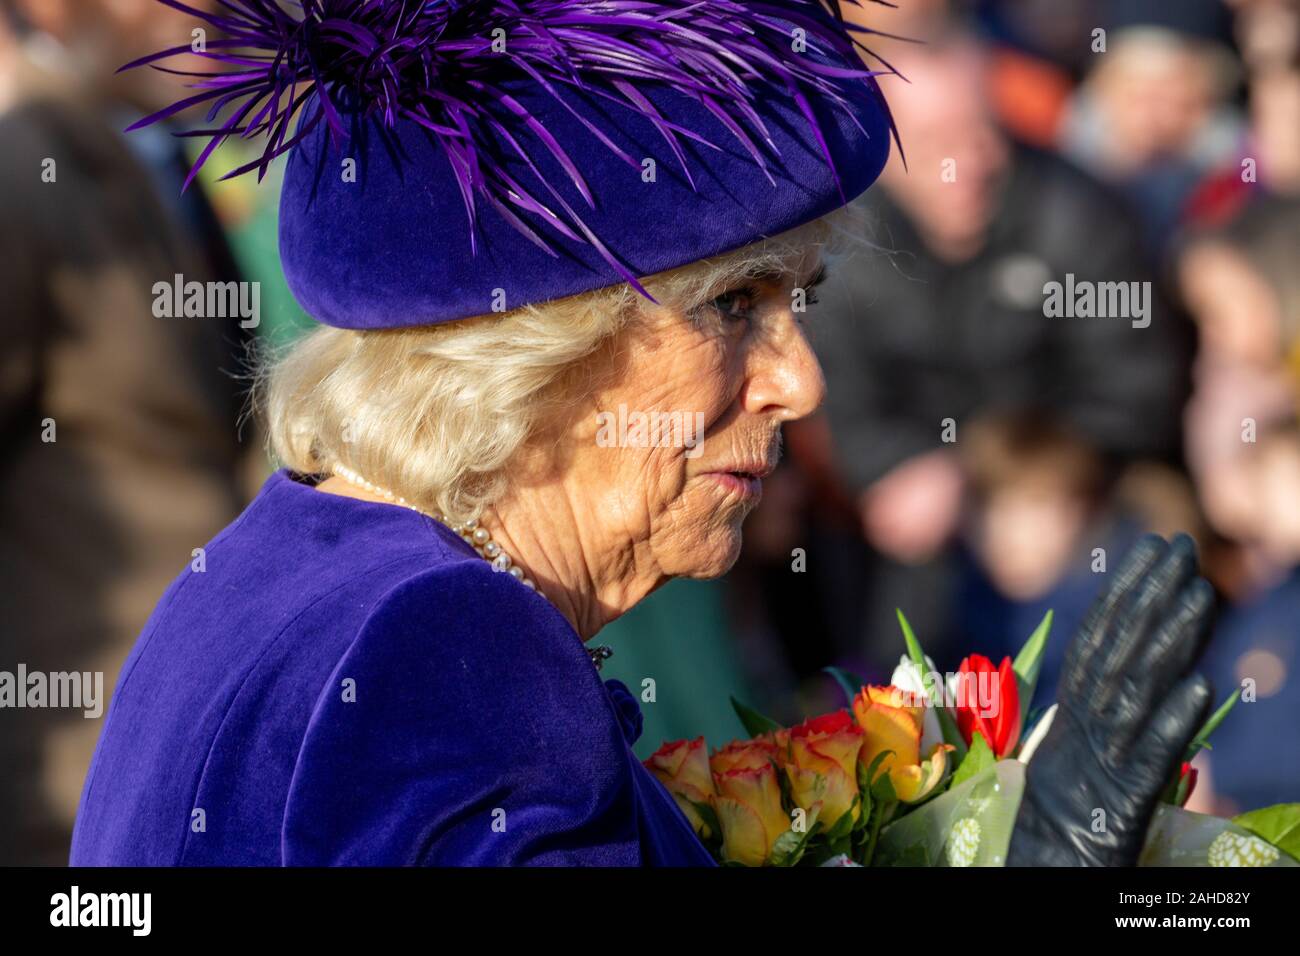 Picture dated December 25th shows Camilla,the Duchess of Cornwall,at the Christmas Day morning church service at St Mary Magdalene Church in Sandringham, Norfolk.   Prince Andrew kept a low profile as members of the Royal Family attended Christmas Day church services in Sandringham in Norfolk. While a large crowd watched the Queen and family members arrive for the main 11am service, the prince attended an earlier service. Prince Andrew was also absent as family members left the church after the service to greet members of the public. Prince Philip, who was released from hospital on Tuesday, di Stock Photo